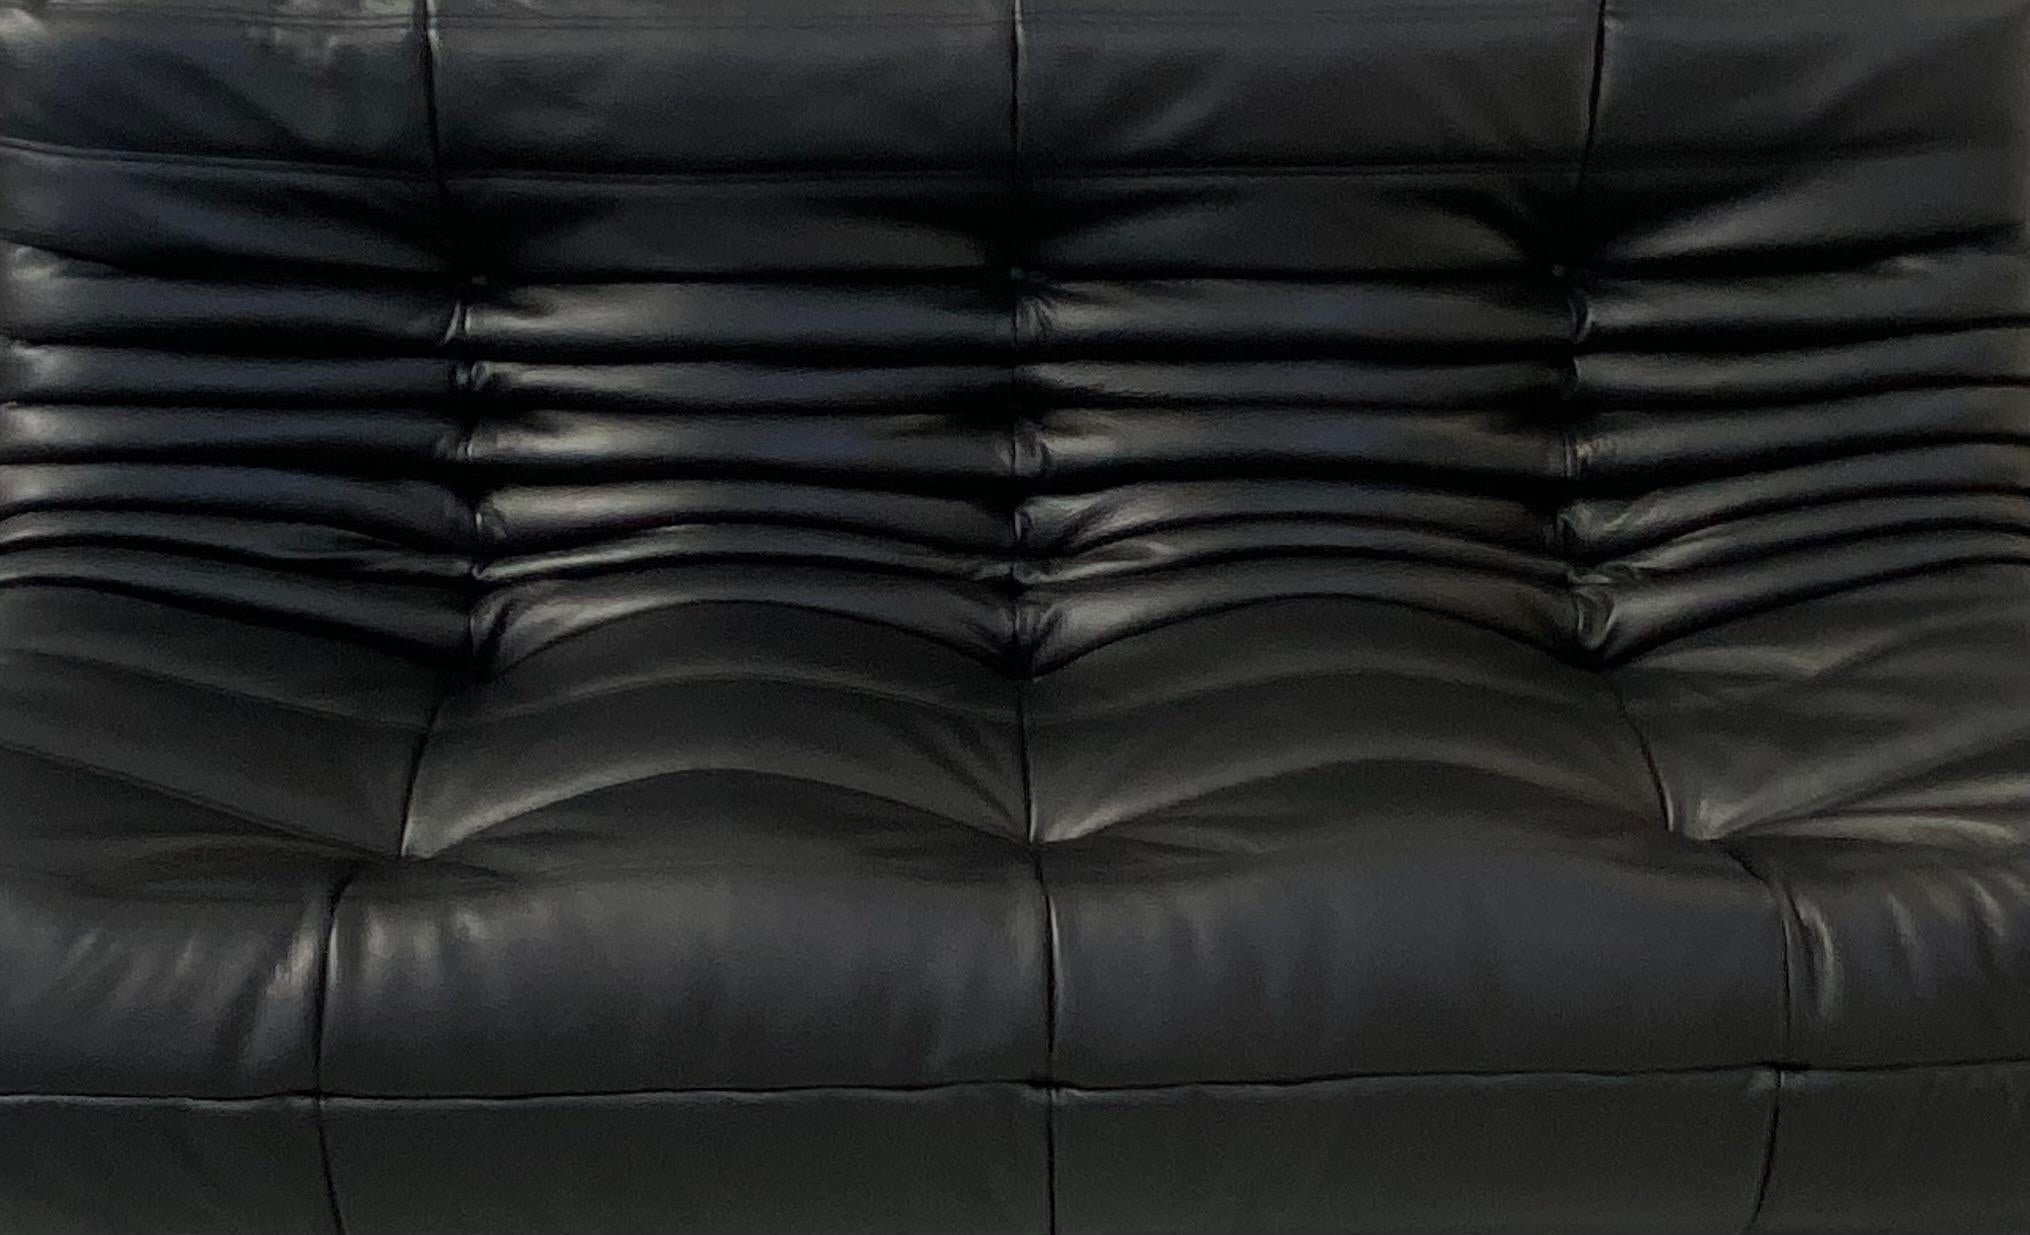 20th Century French Togo Sofa in Black Leather by Michel Ducaroy for Ligne Roset. For Sale